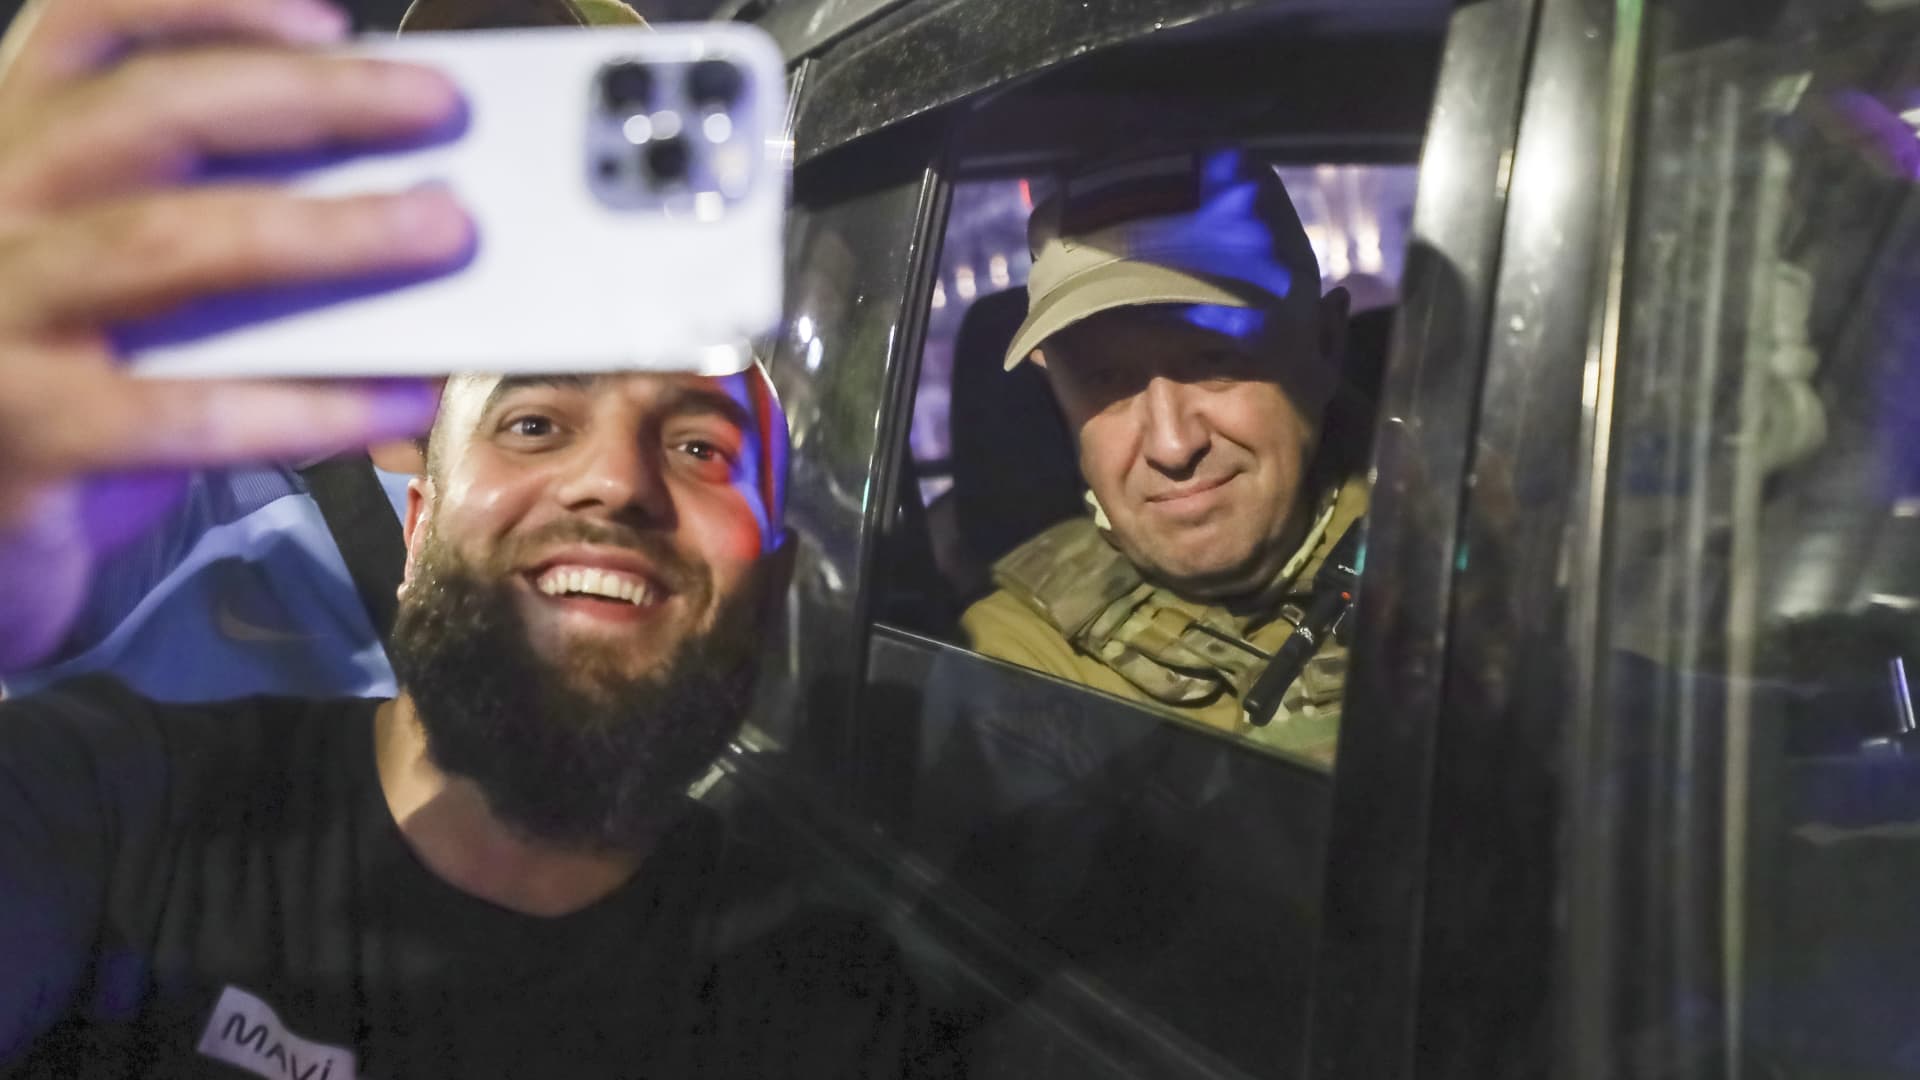 Yevgeny Prigozhin, the owner of the Wagner Group military company, right, sits inside a military vehicle posing for a selfie photo with a local civilian on a street in Rostov-on-Don, Russia, Saturday, June 24, 2023, prior to leaving an area of the headquarters of the Southern Military District.